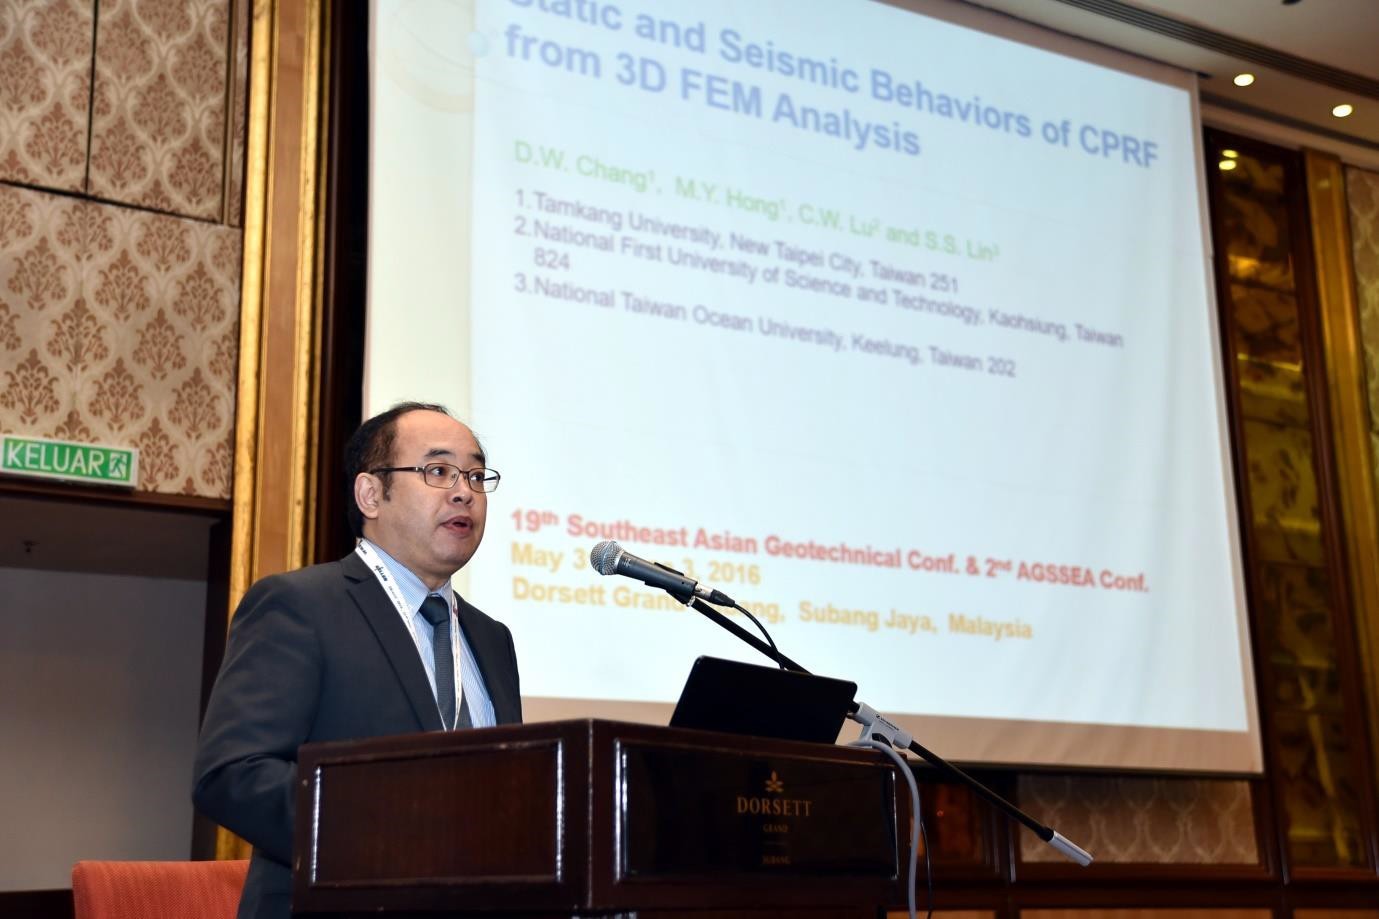 Prof Der-Wen Chang made his Presentation at Parallel Session